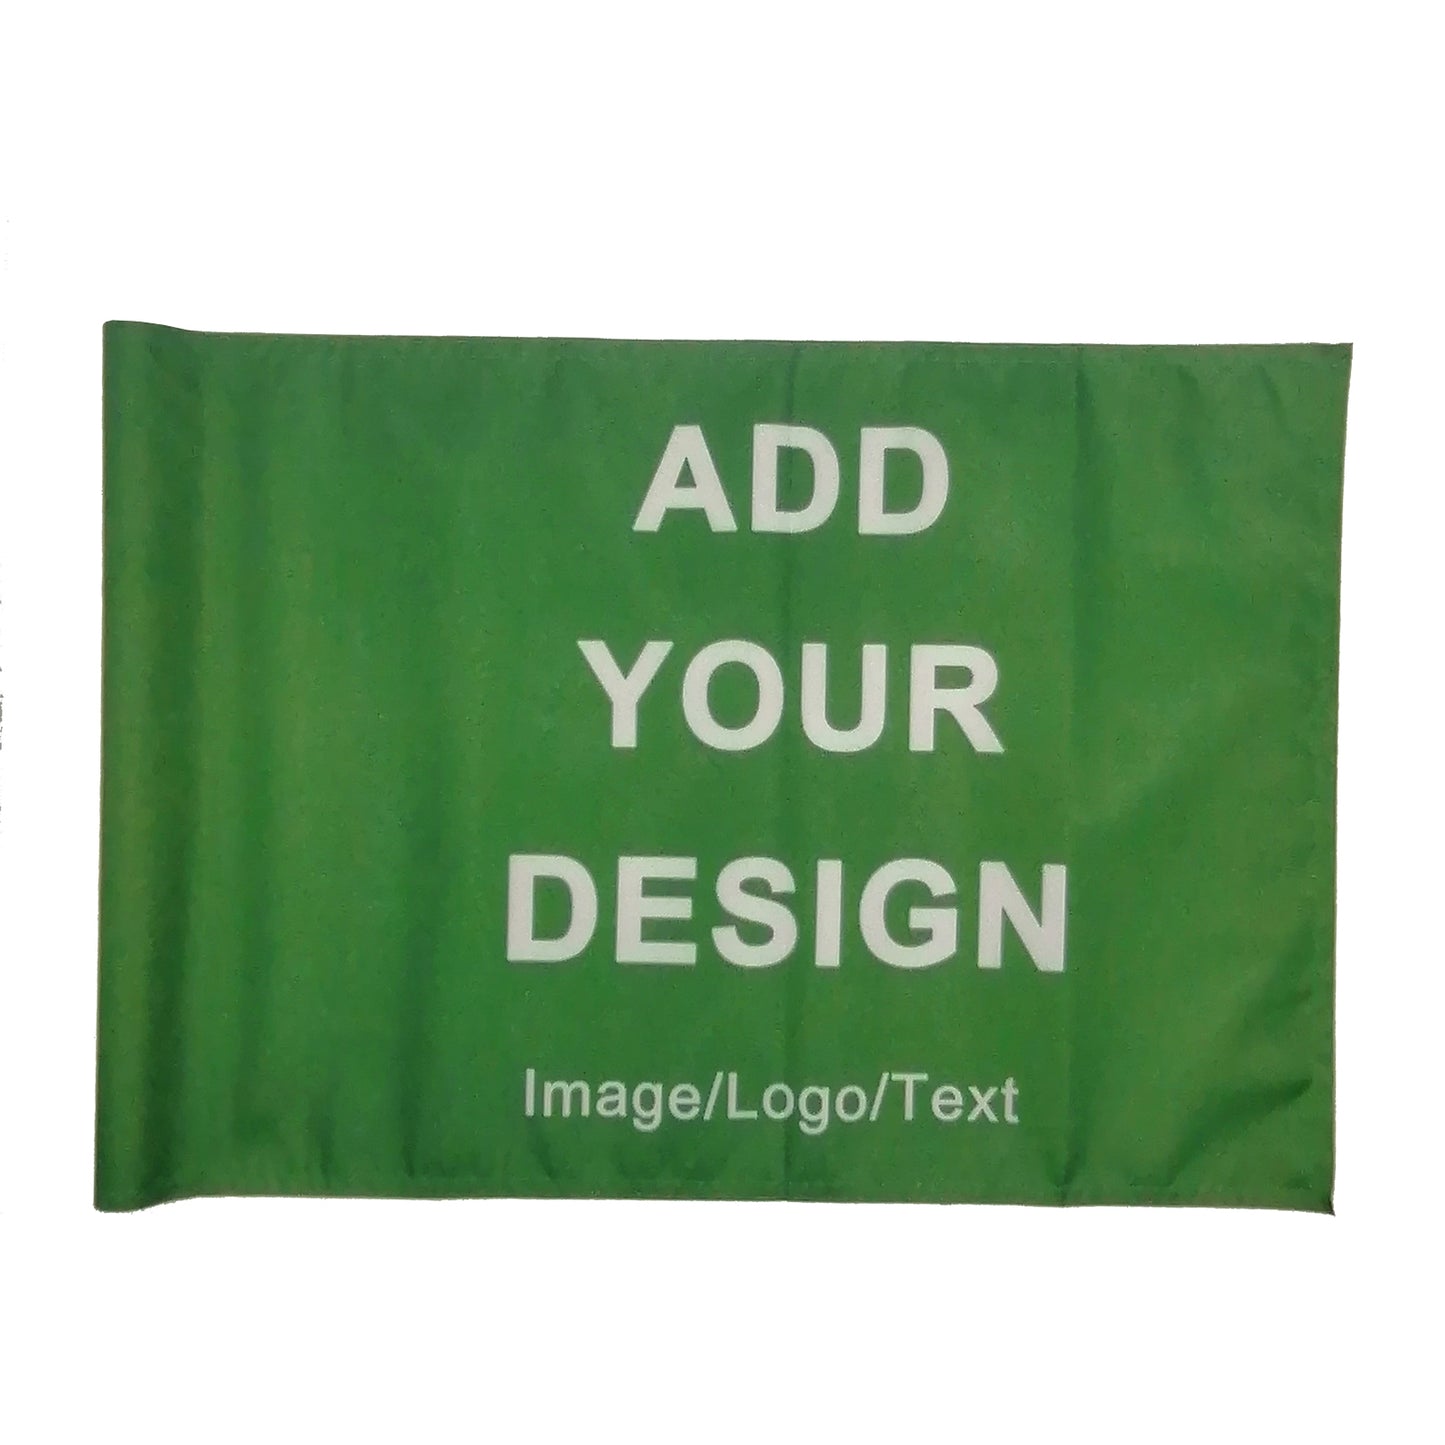 Custom Golf Flag Personalized Flag for Golf Pin with Plastic Tube or Brass Grommets